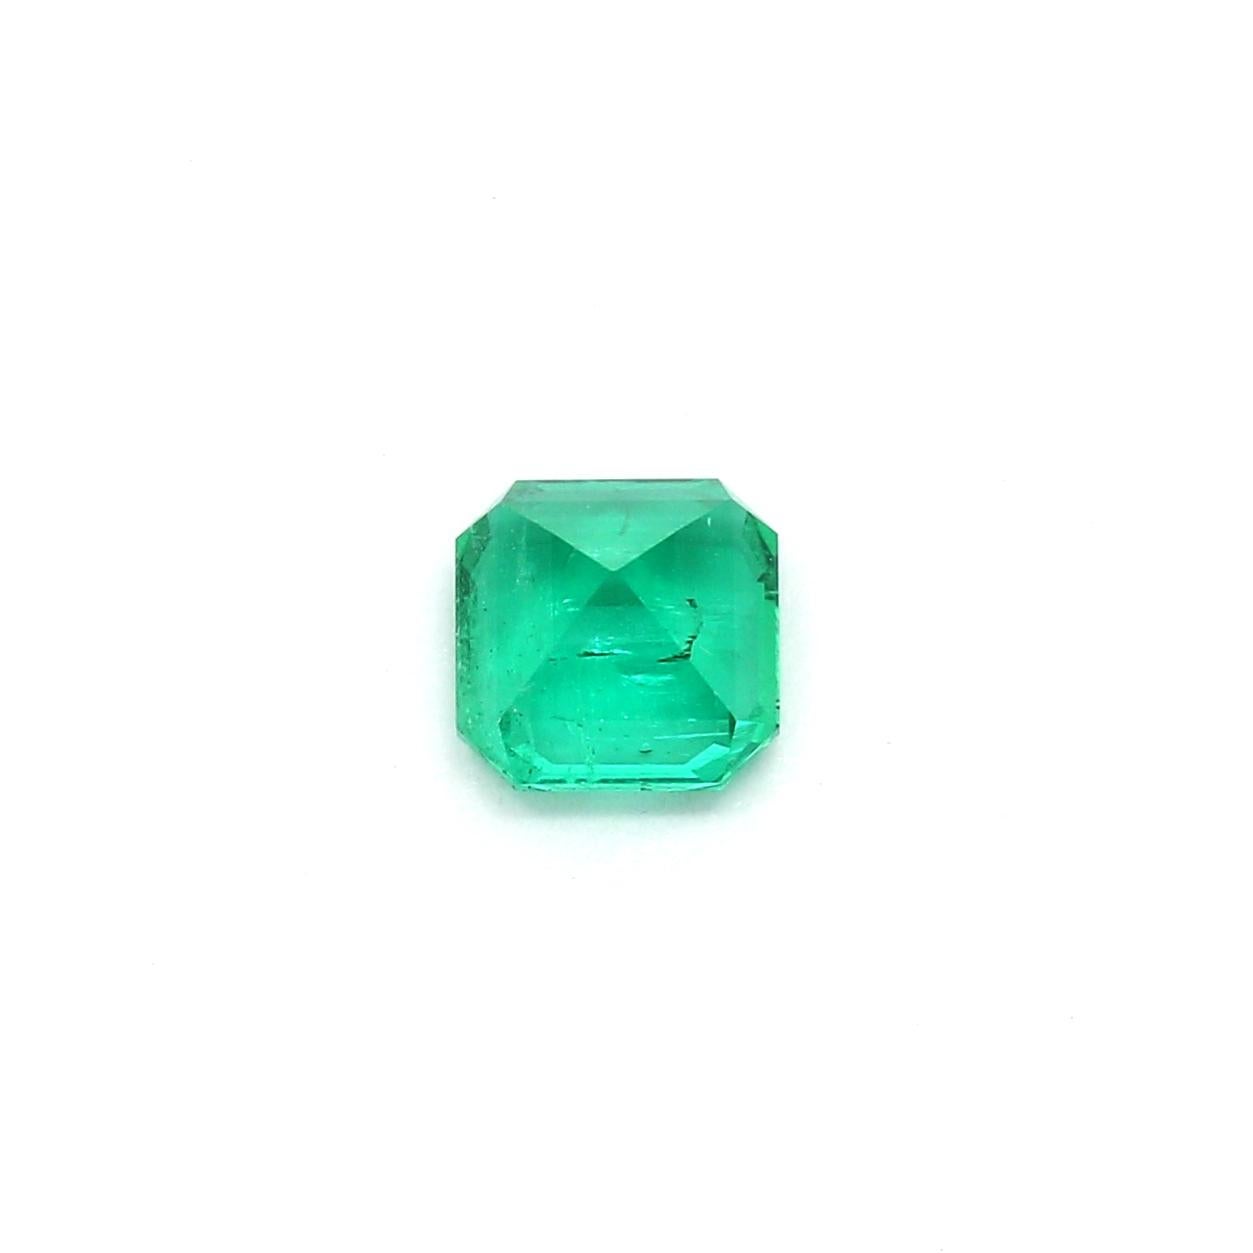 An amazing Russian Emerald which allows jewelers to create a unique piece of wearable art.
This exceptional quality gemstone would make a custom-made jewelry design. Perfect for a Ring or Pendant.

Shape - Octagon
Weight - 0.85 ct
Treatment -